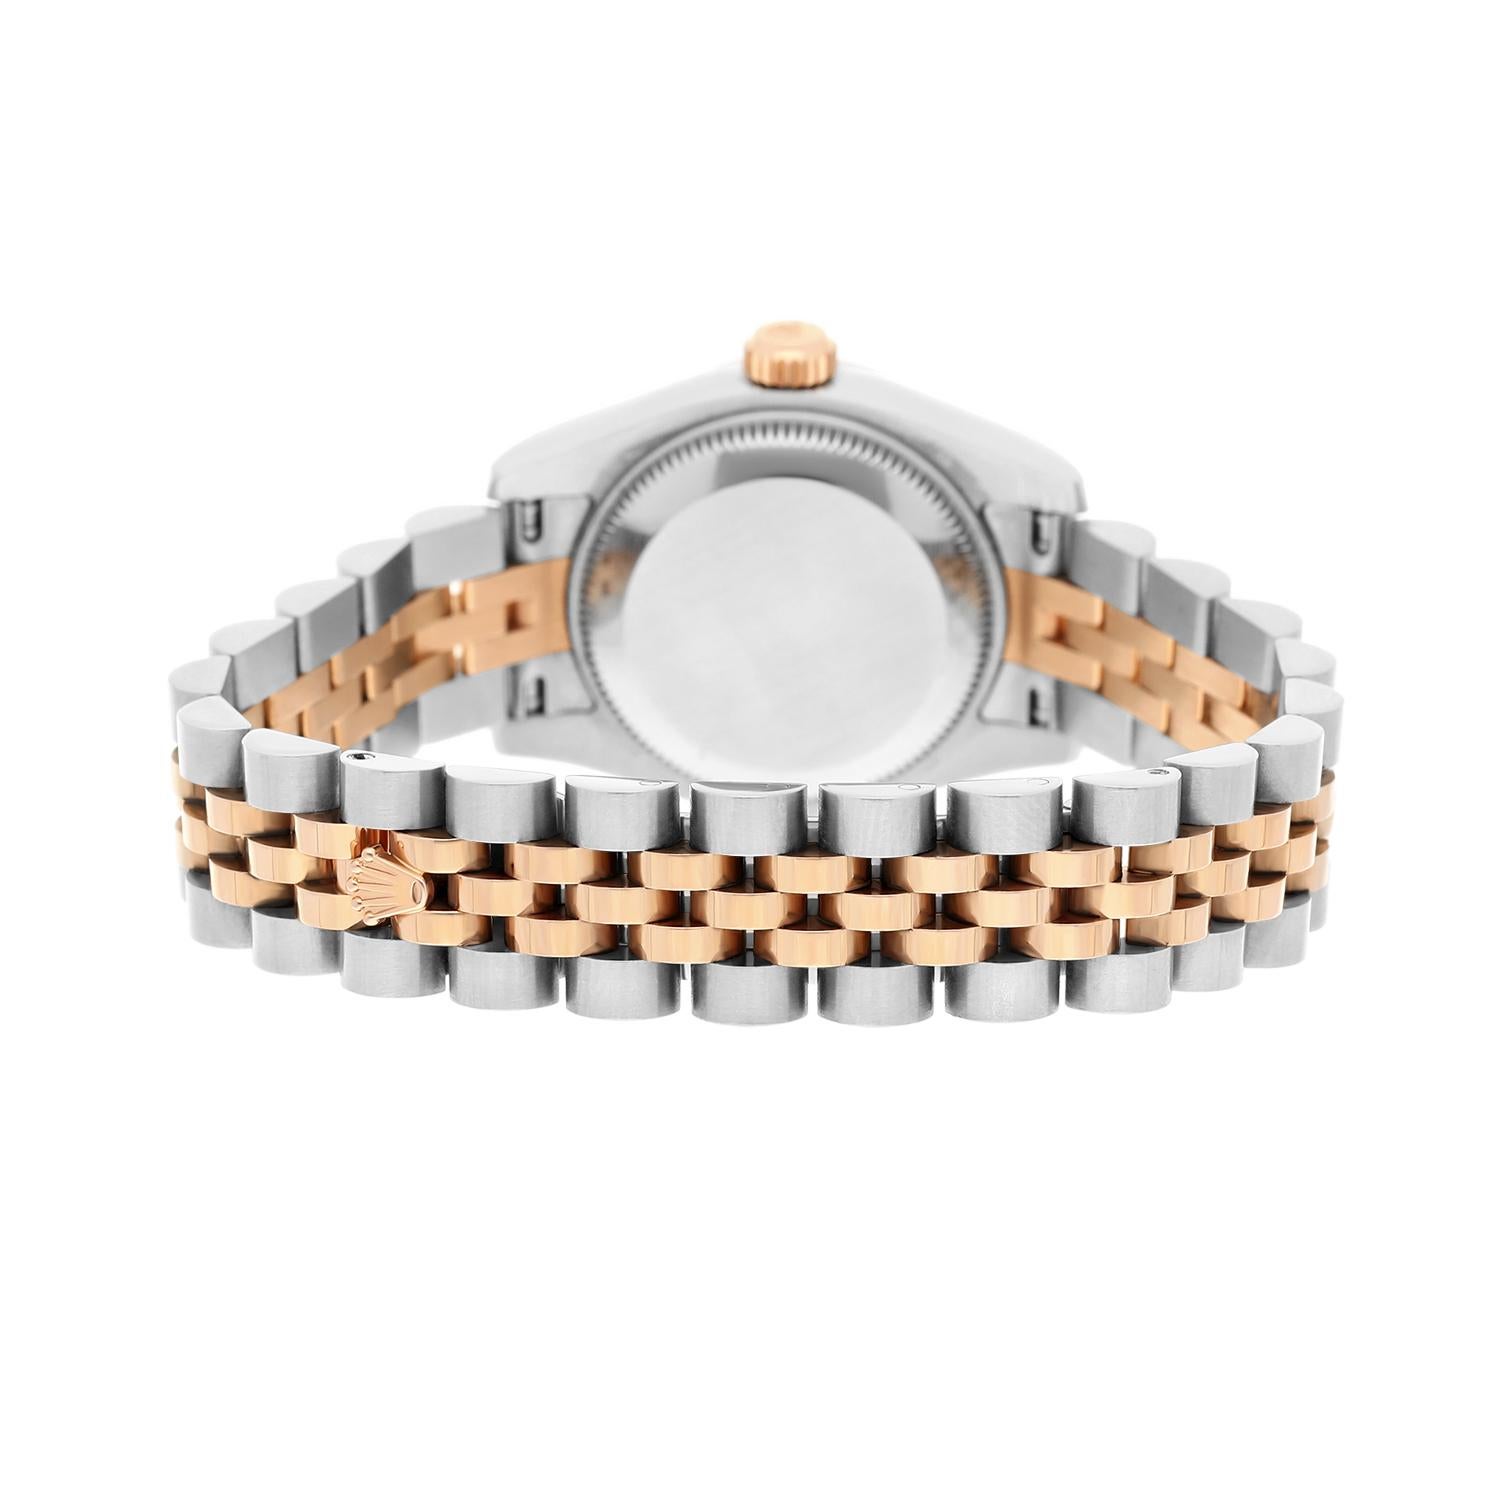 Rolex Lady-Datejust 26mm Stainless Steel & Rose Gold 179171 Meteorite Diamond For Sale 2